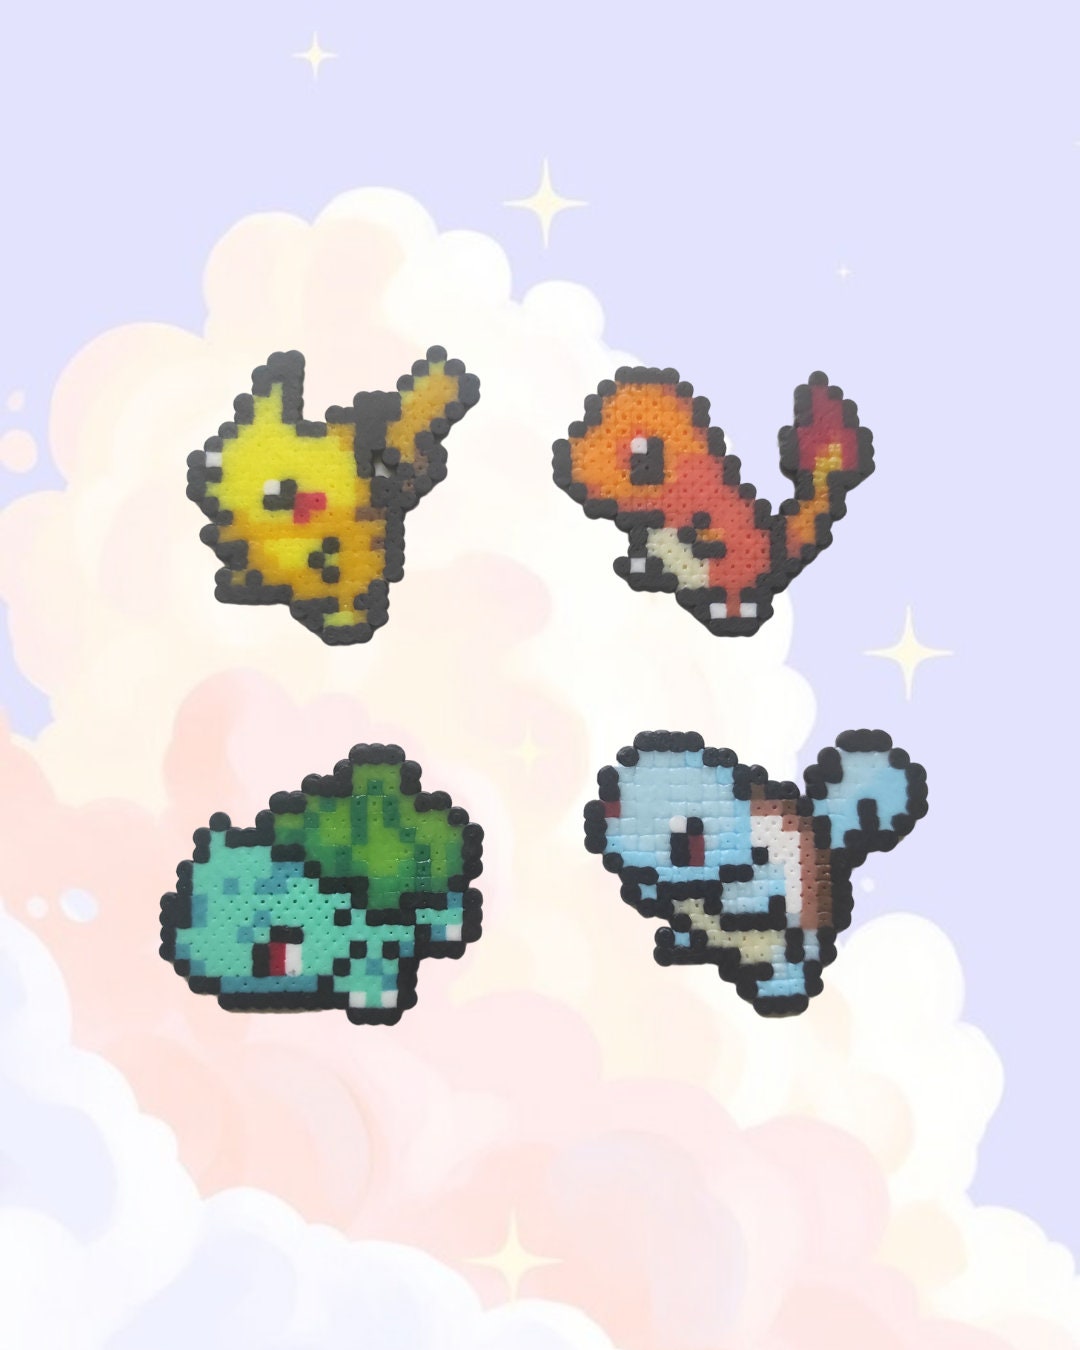 Cute yellow candy pufferfish pokemon from the top view, pixel art